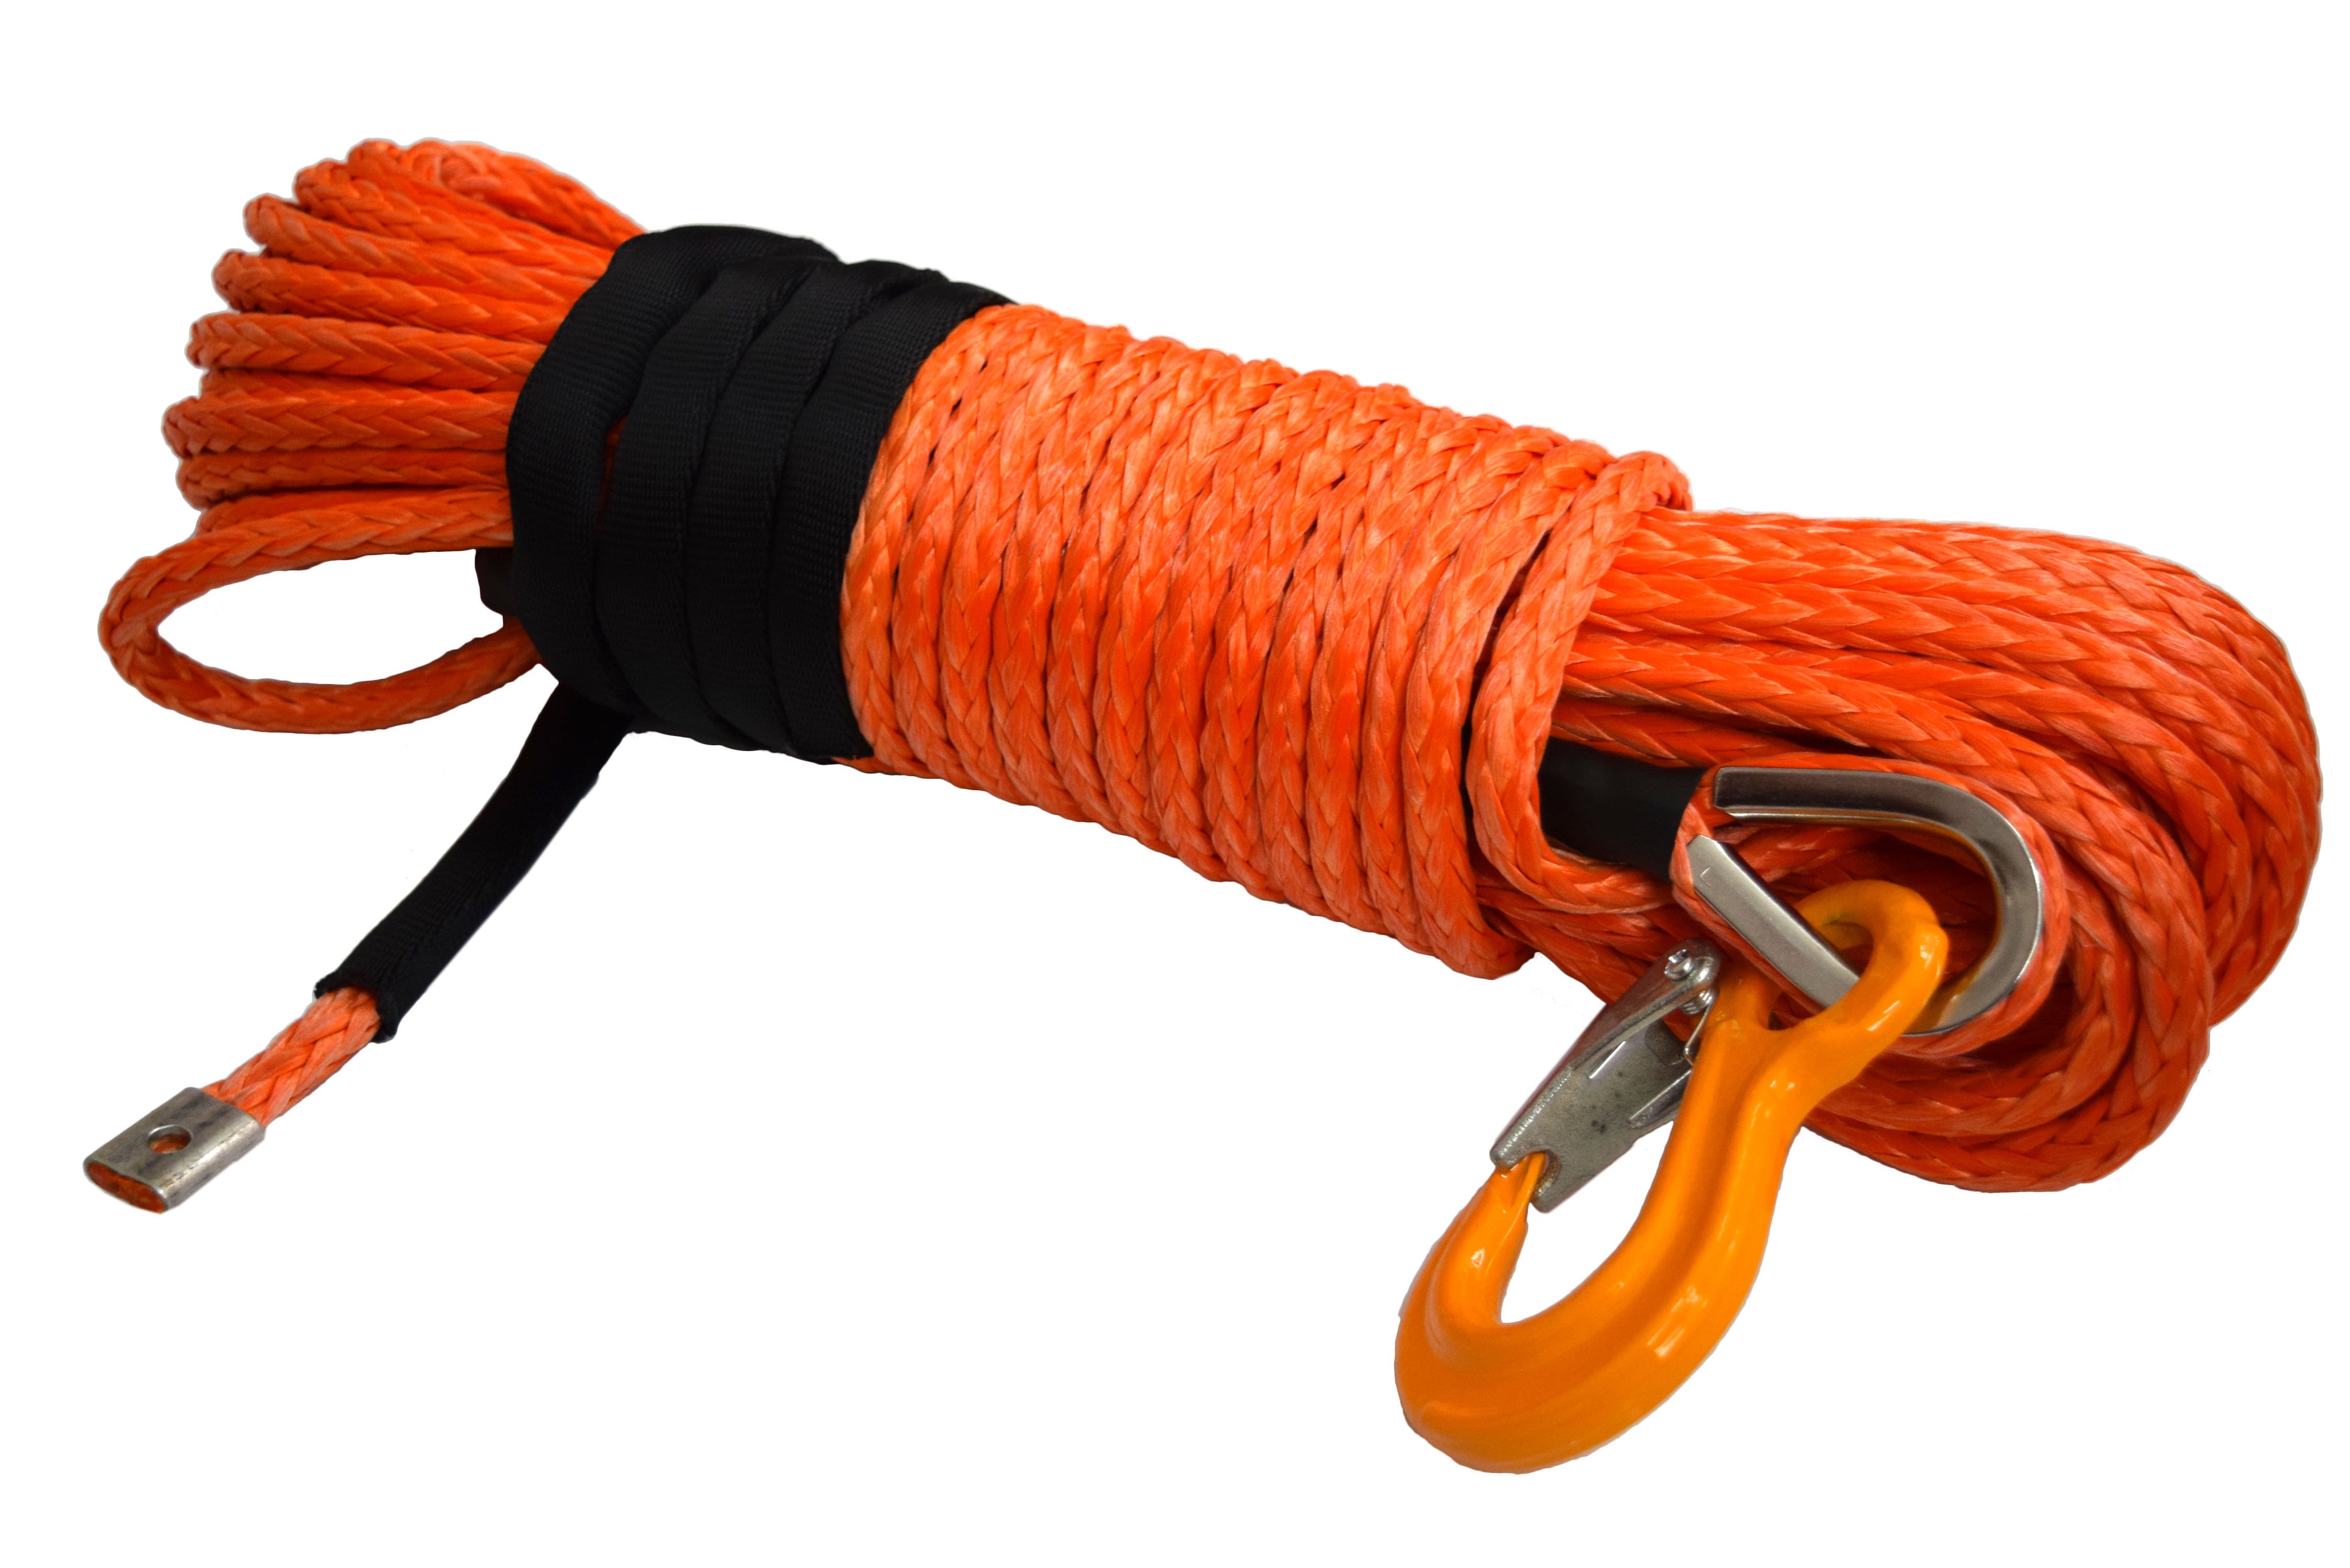 QIQU orange 100ft 3/8 inch 4x4 SUV Off-road car synthetic winch cable rope line with thimble sleeve hook lug